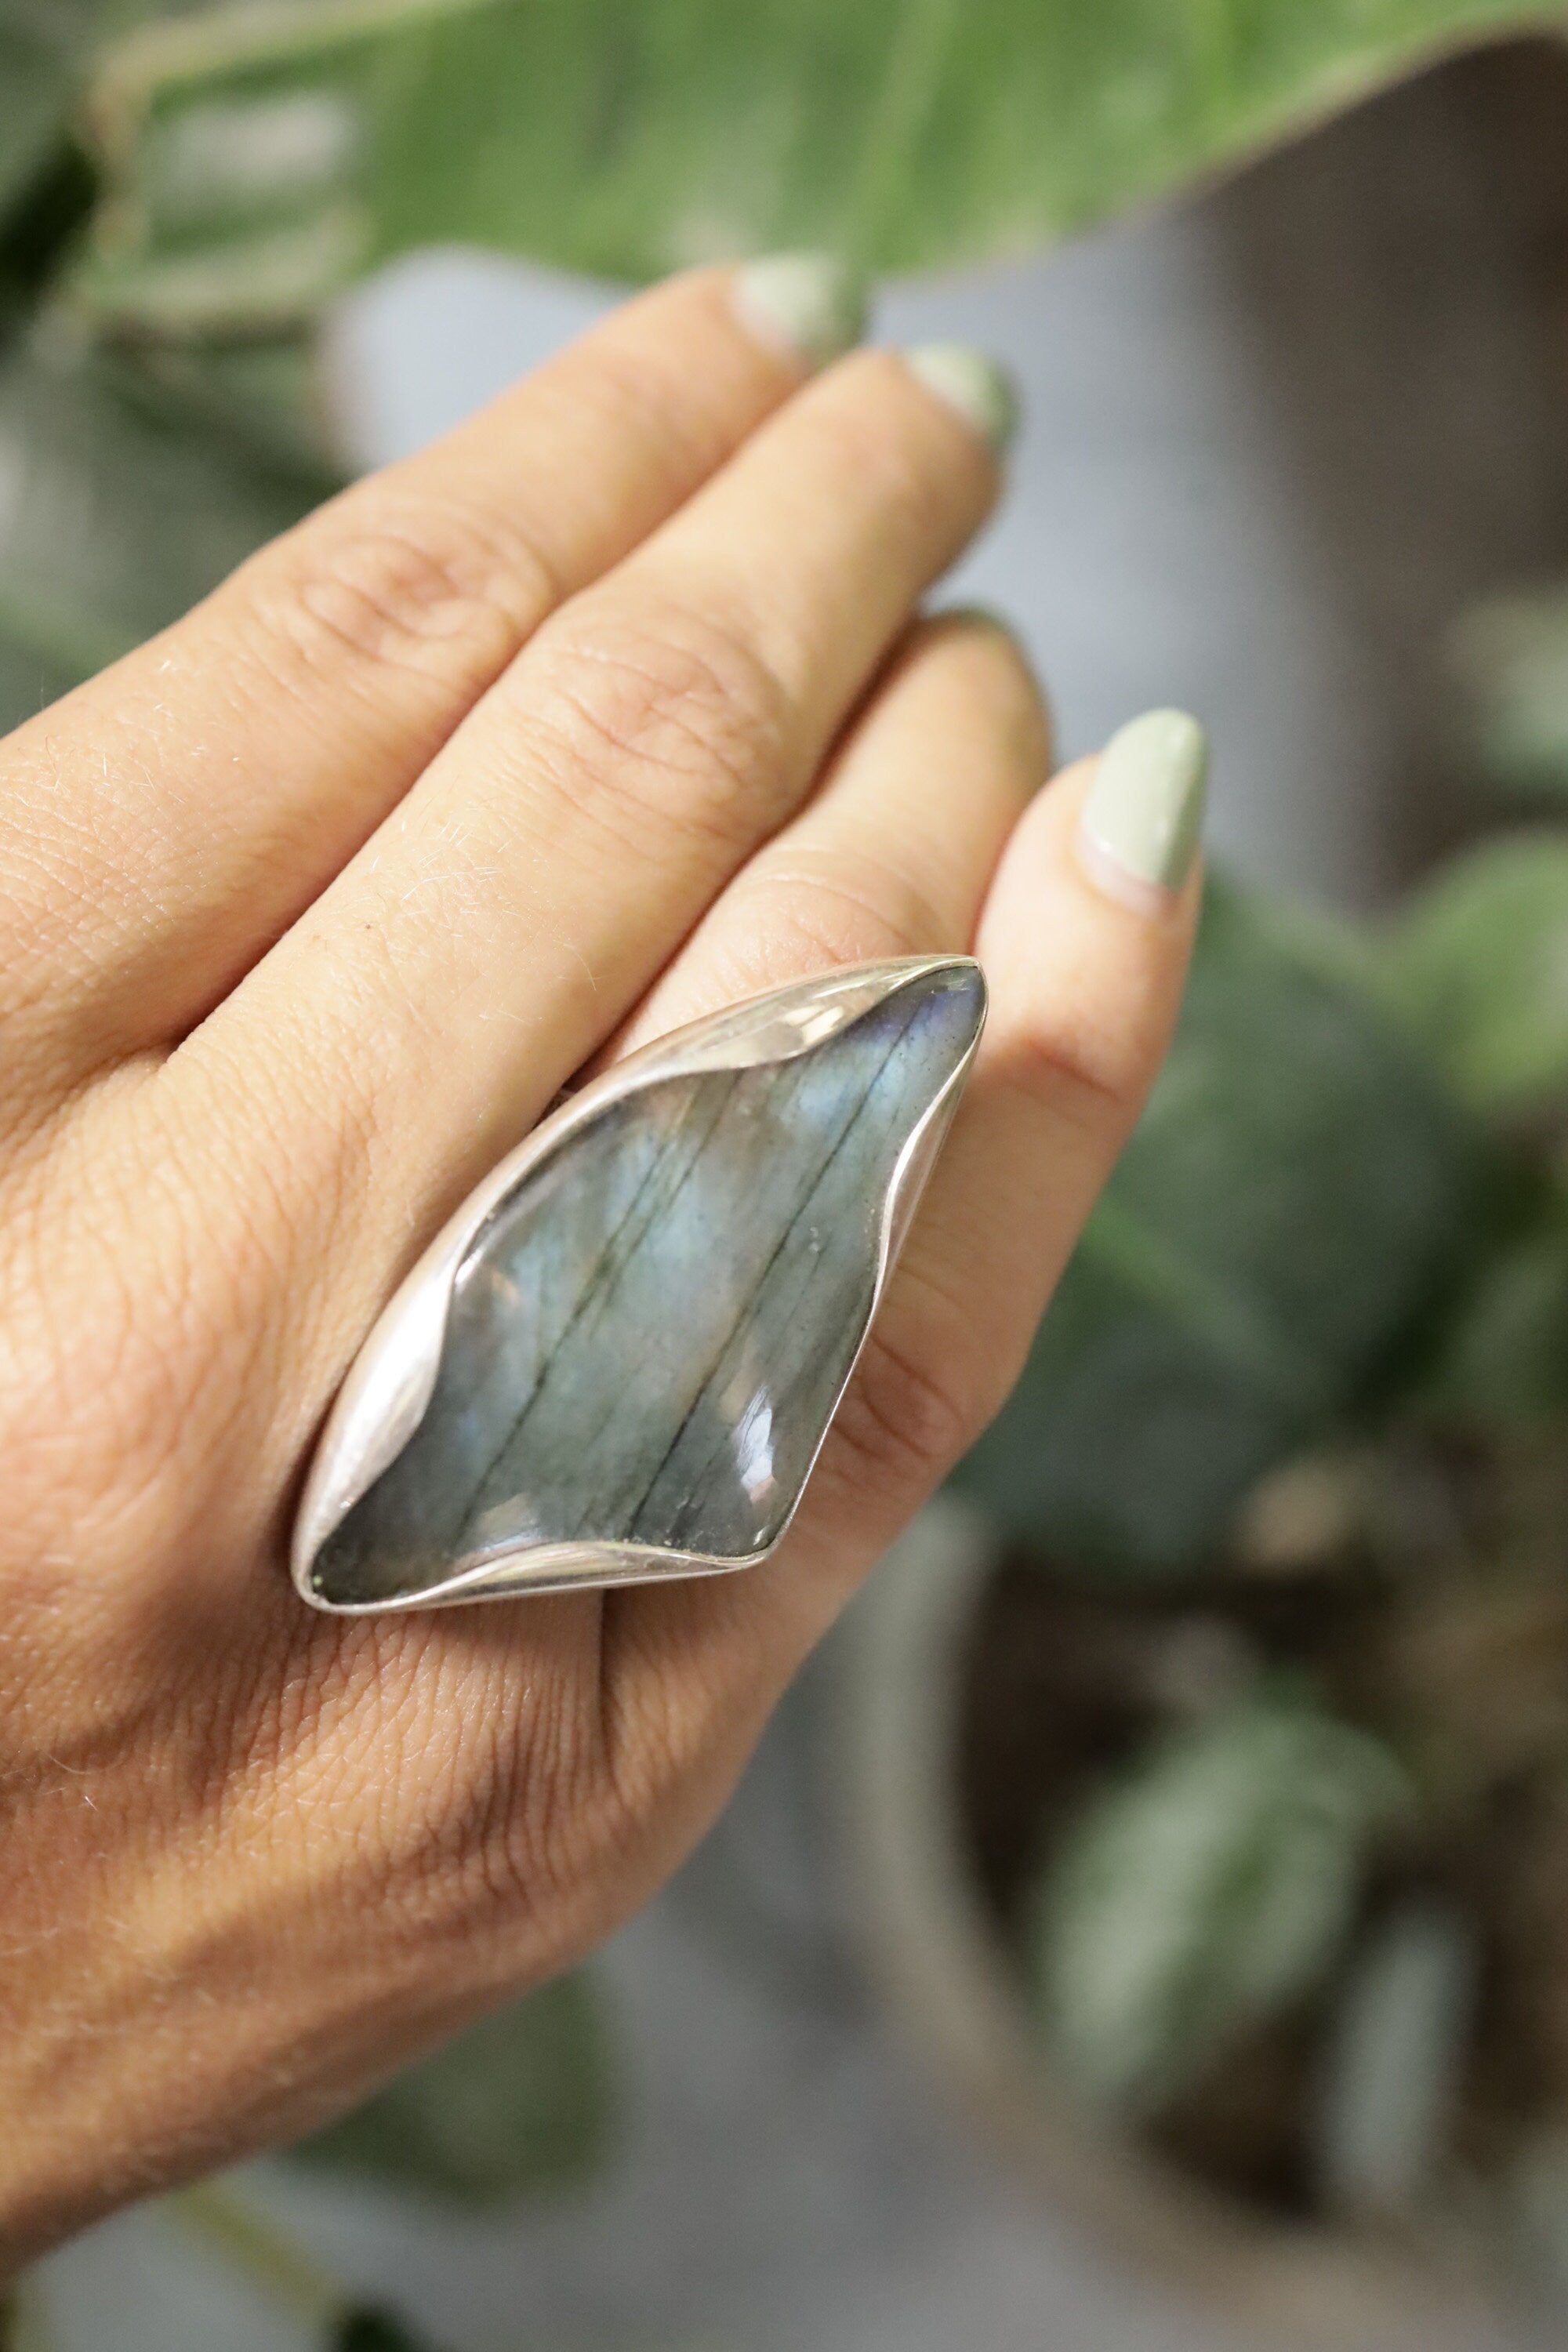 A Sturdy Embrace of Ancient Mystique: Adjustable Sterling Silver Ring with Tooth-Shaped Labradorite - Unisex - Size 5-10 US - NO/01